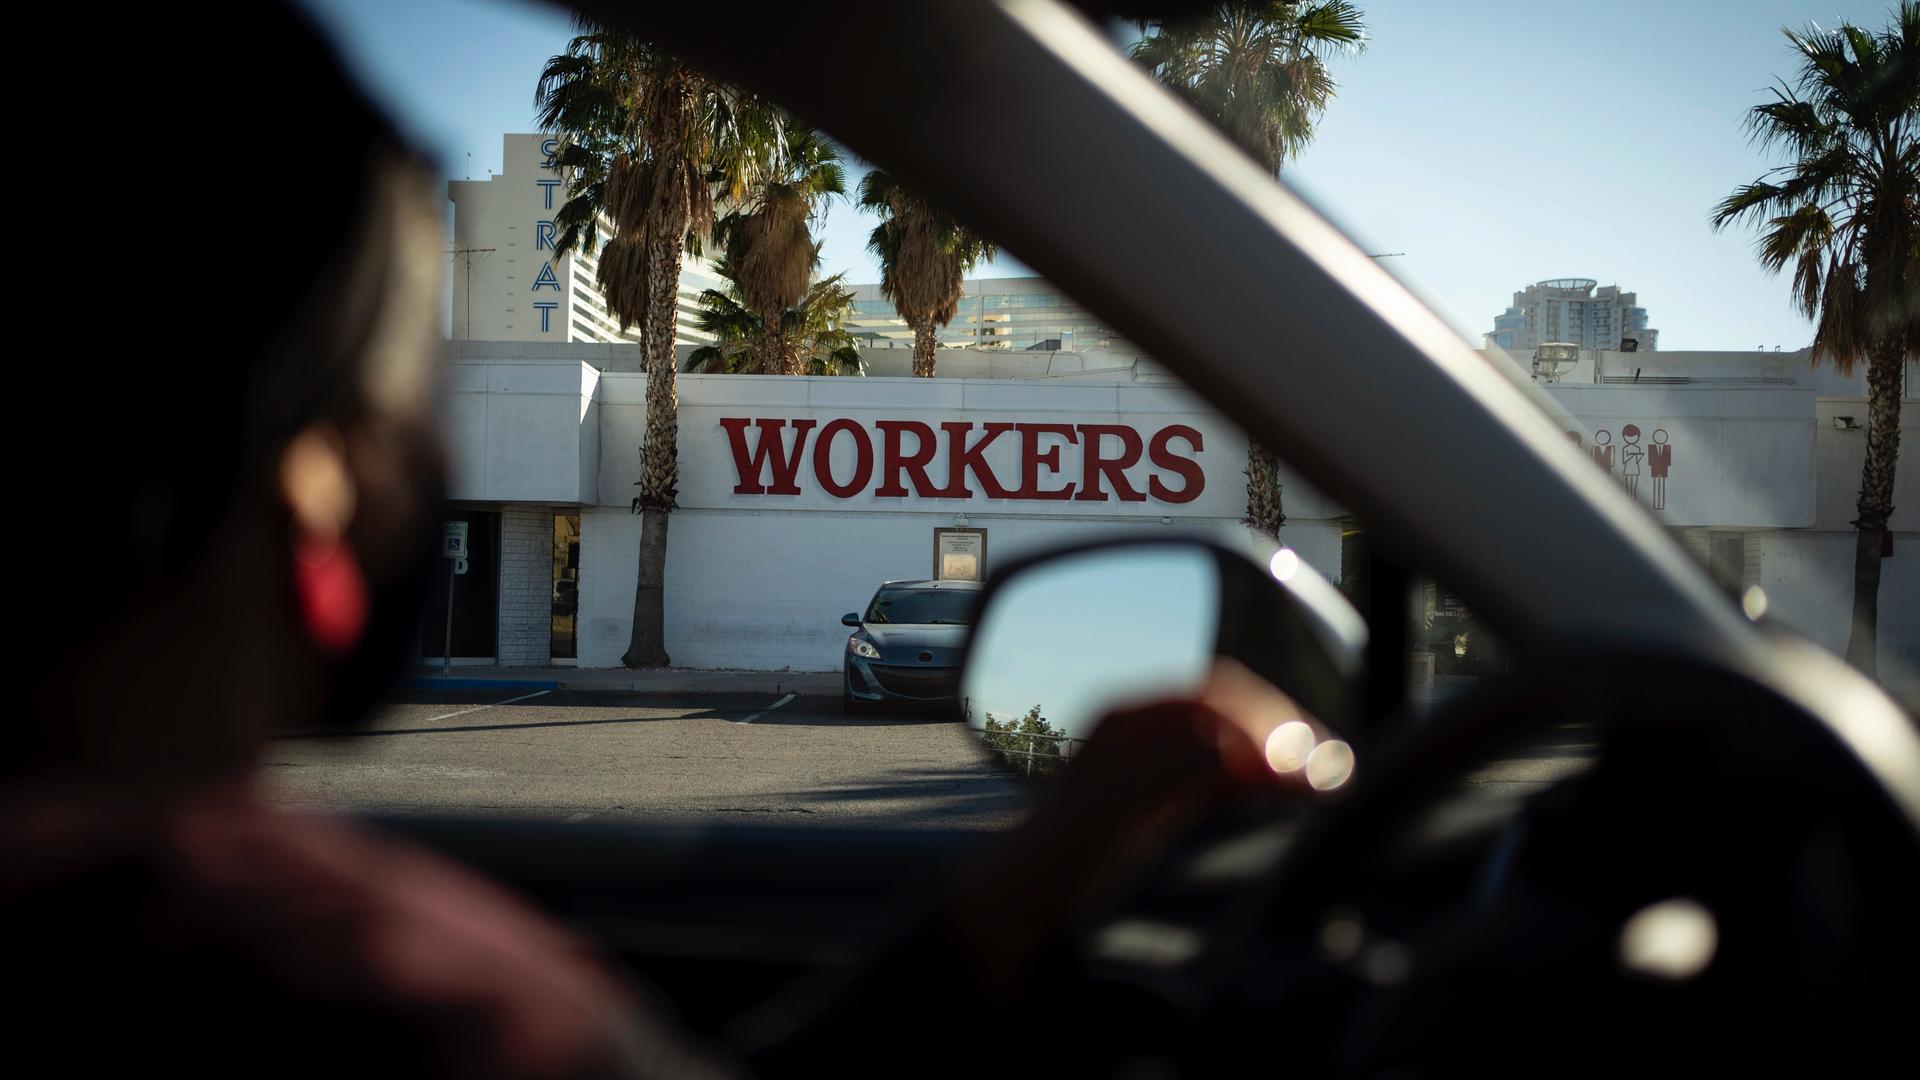 The office of the Culinary Workers Union is seen through a car window in Las Vegas, Nov. 9, 2020. The union represents 60,000 people, most of them immigrants, in the Las Vegas area who work in the hospitality industry. 